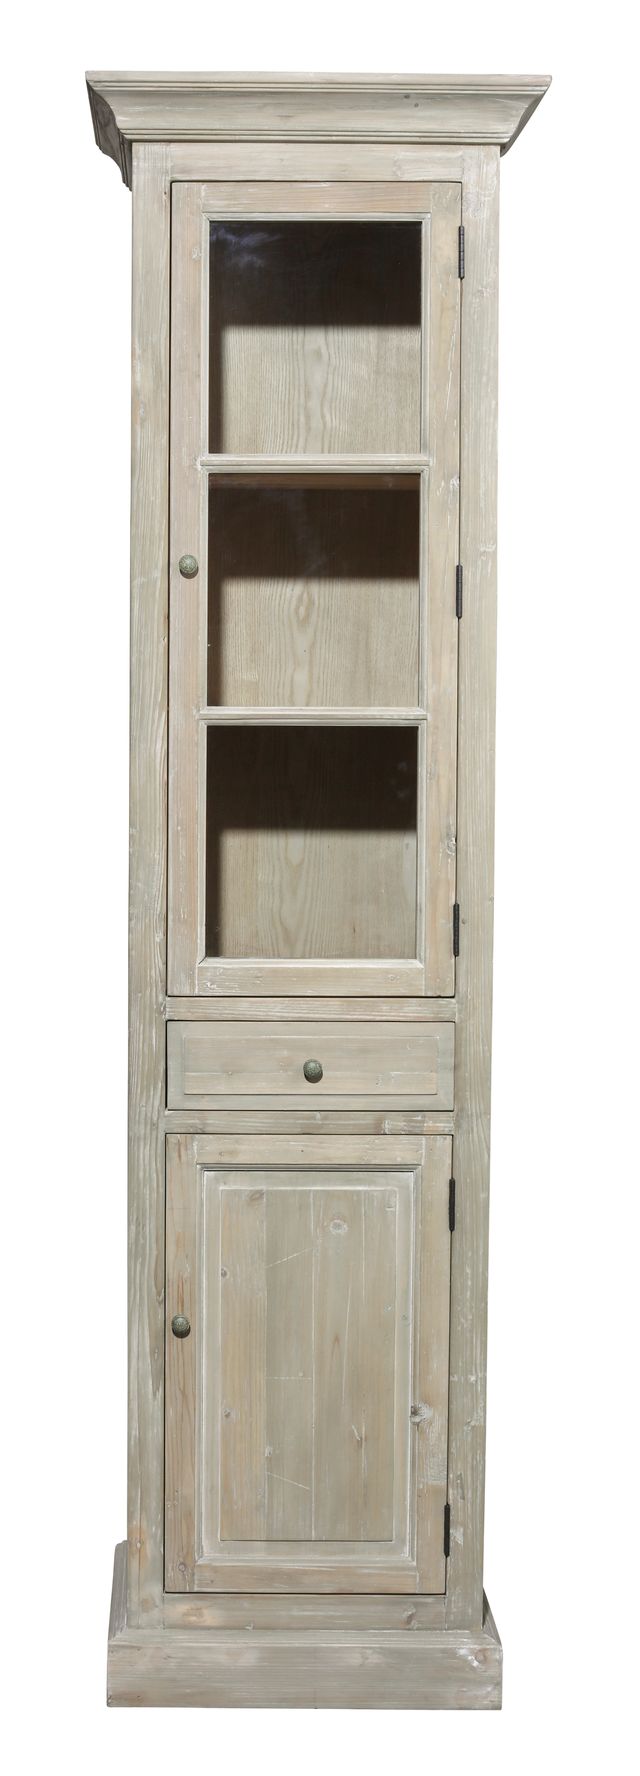 Two-Door Cabinet in Wash Pine Finish with Flat Front Top